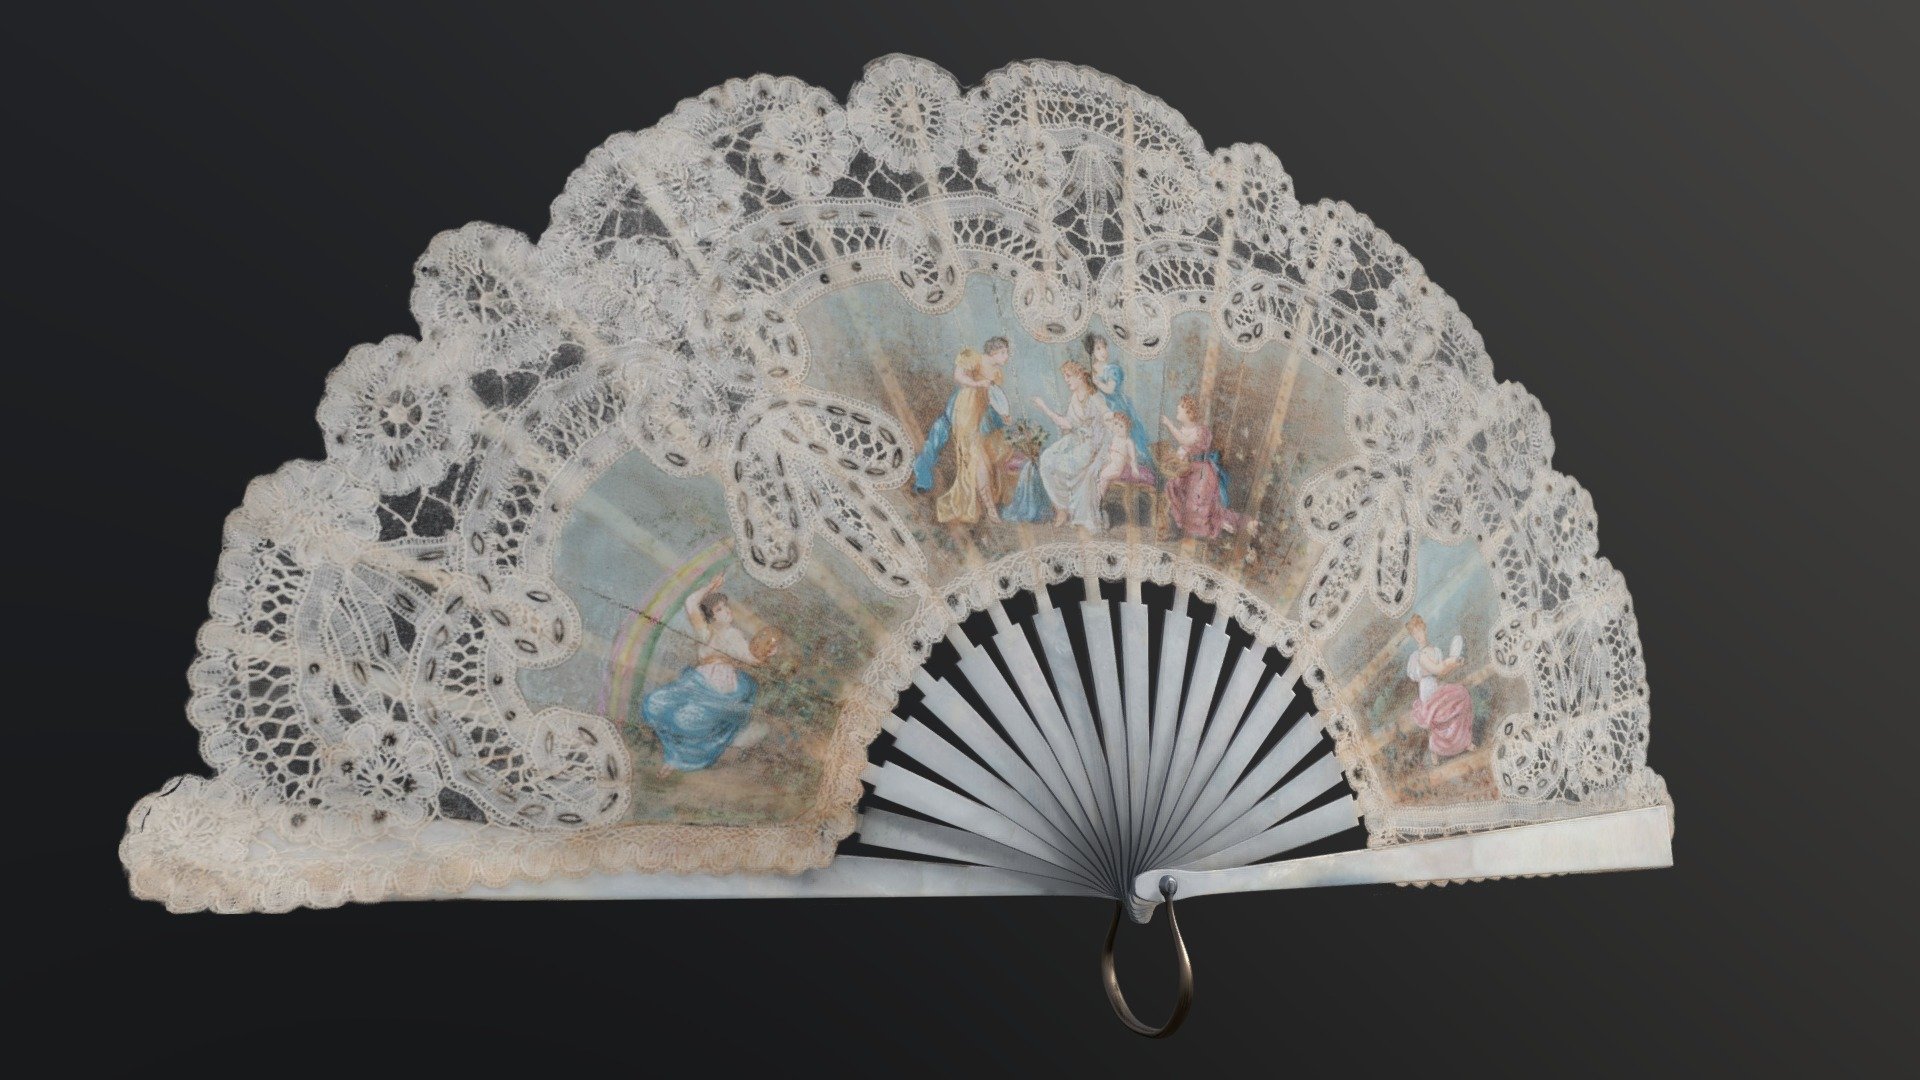 Russian empire (?)
1840s
Dimensions: 2.6 х 13.5 х 42 cm
Materials: mother-of-pearl, gauze, lace, copper, gouache 
Technique: carving, painting, braiding, embroidery - Folding fan with mythological scene - 3D model by AERO3D (@aero3d.ua) 3d model